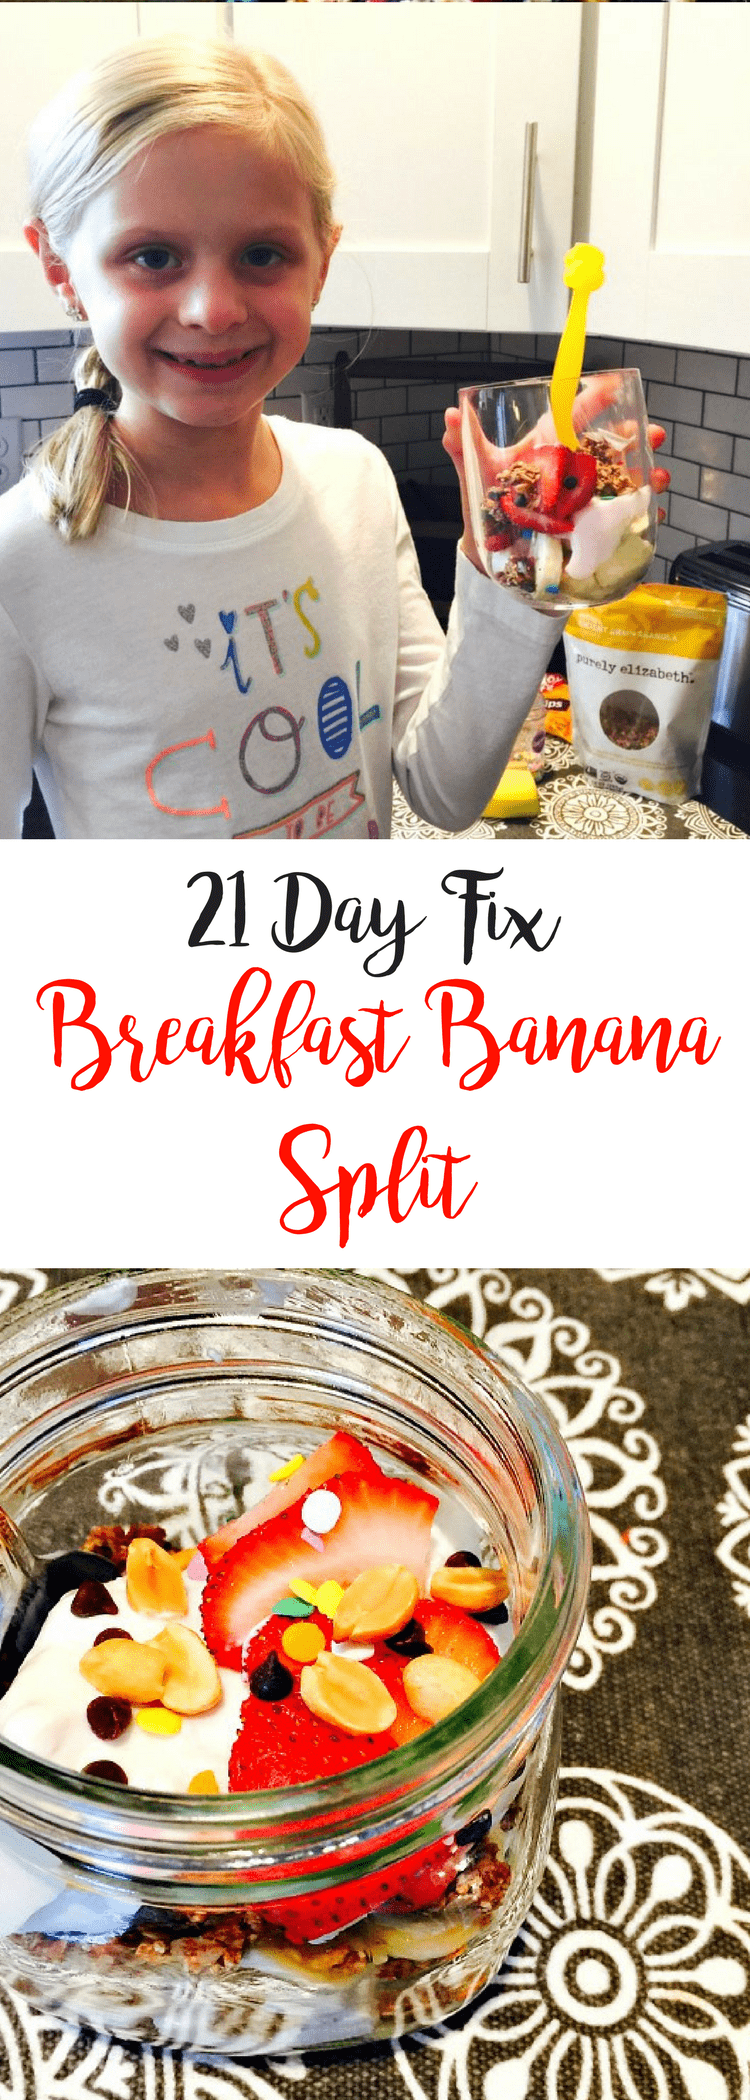 21 Day Fix Breakfast Banana Split {Make ahead) | Confessions of a Fit Foodie